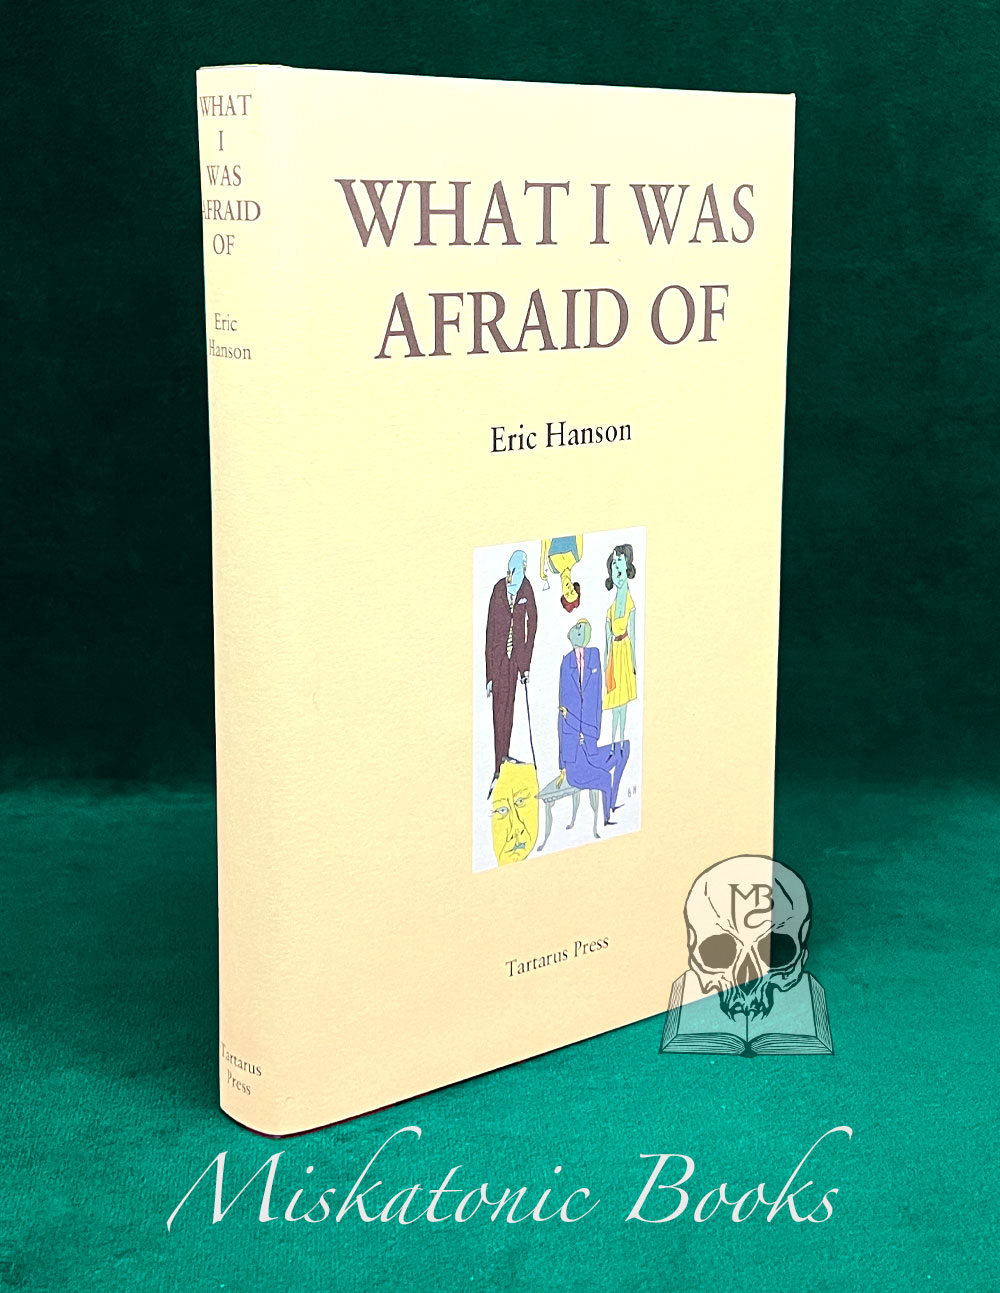 WHAT I WAS AFRAID OF by Eric Hanson - Hardcover Edition Limited To 300 Copies